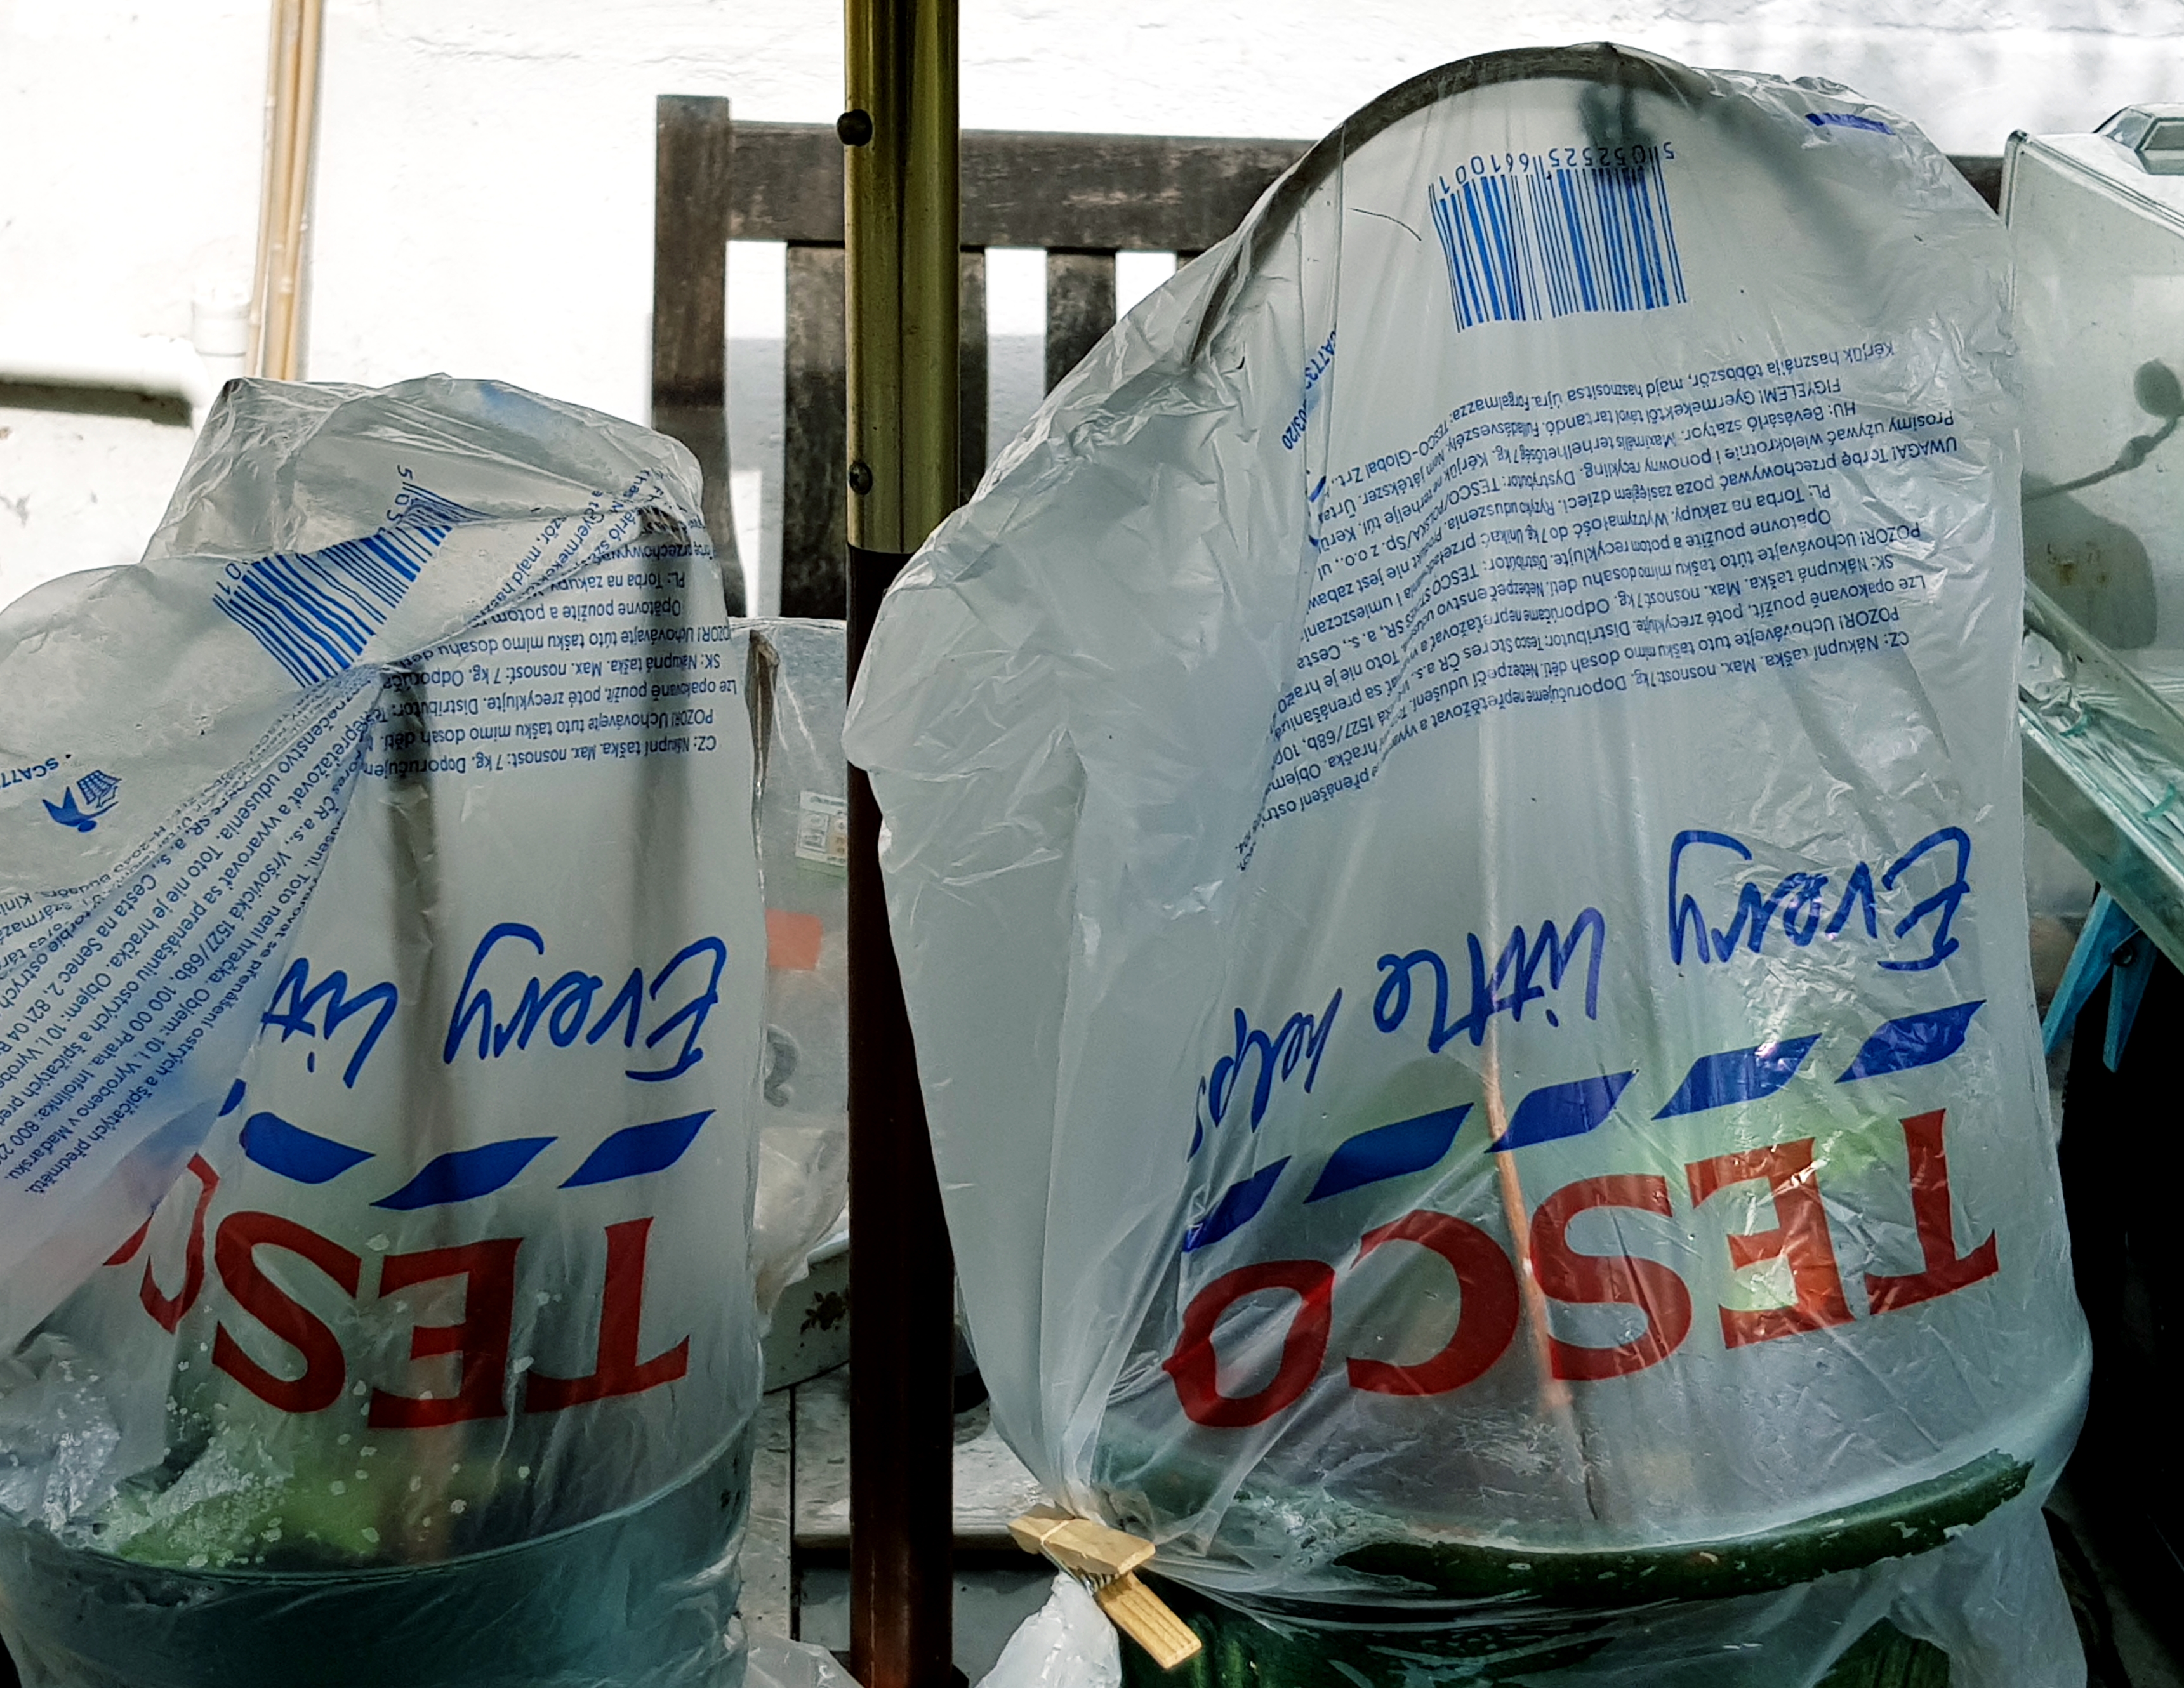 File:Tesco plastic bags reused as cloches.jpg - Wikimedia Commons